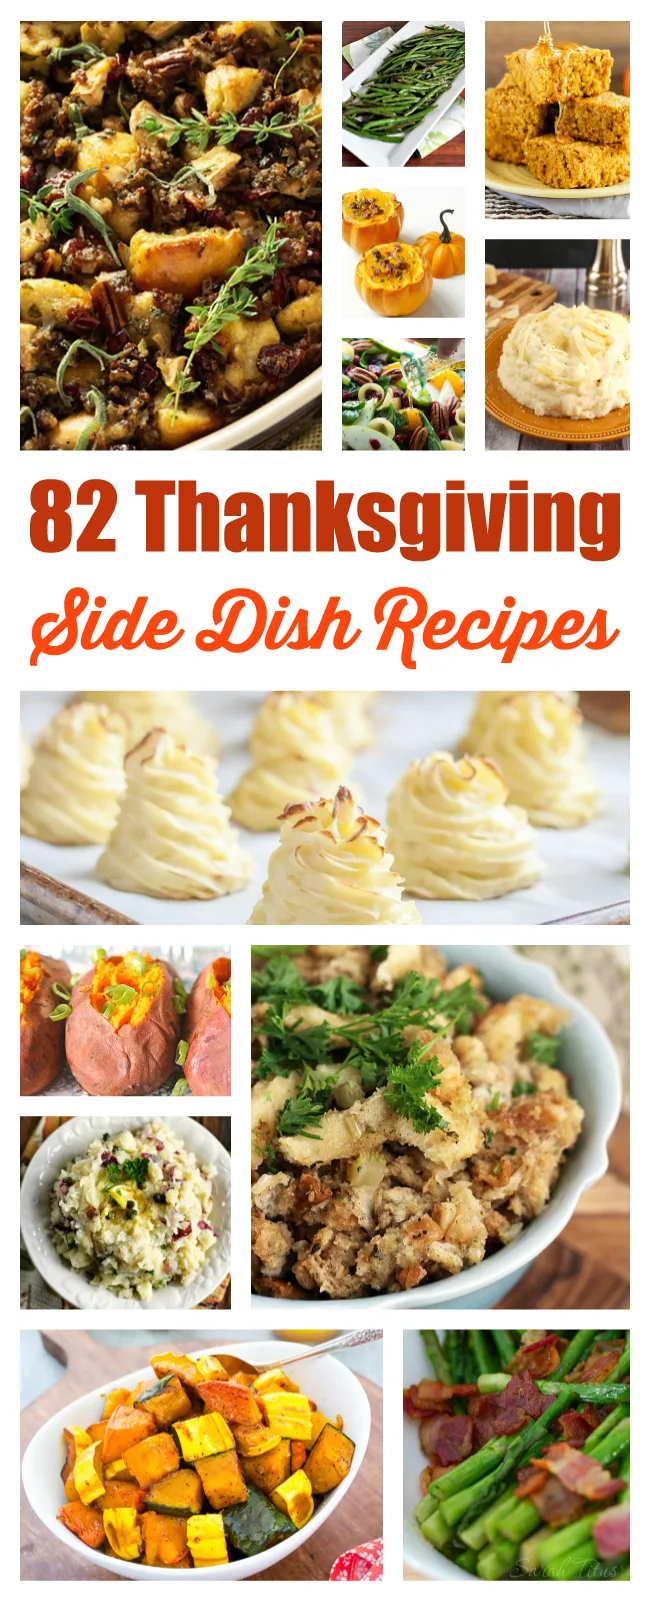 Consider Thanksgiving planned with this H U G E list of Thanksgiving Side Dishes. Those potatoes though!